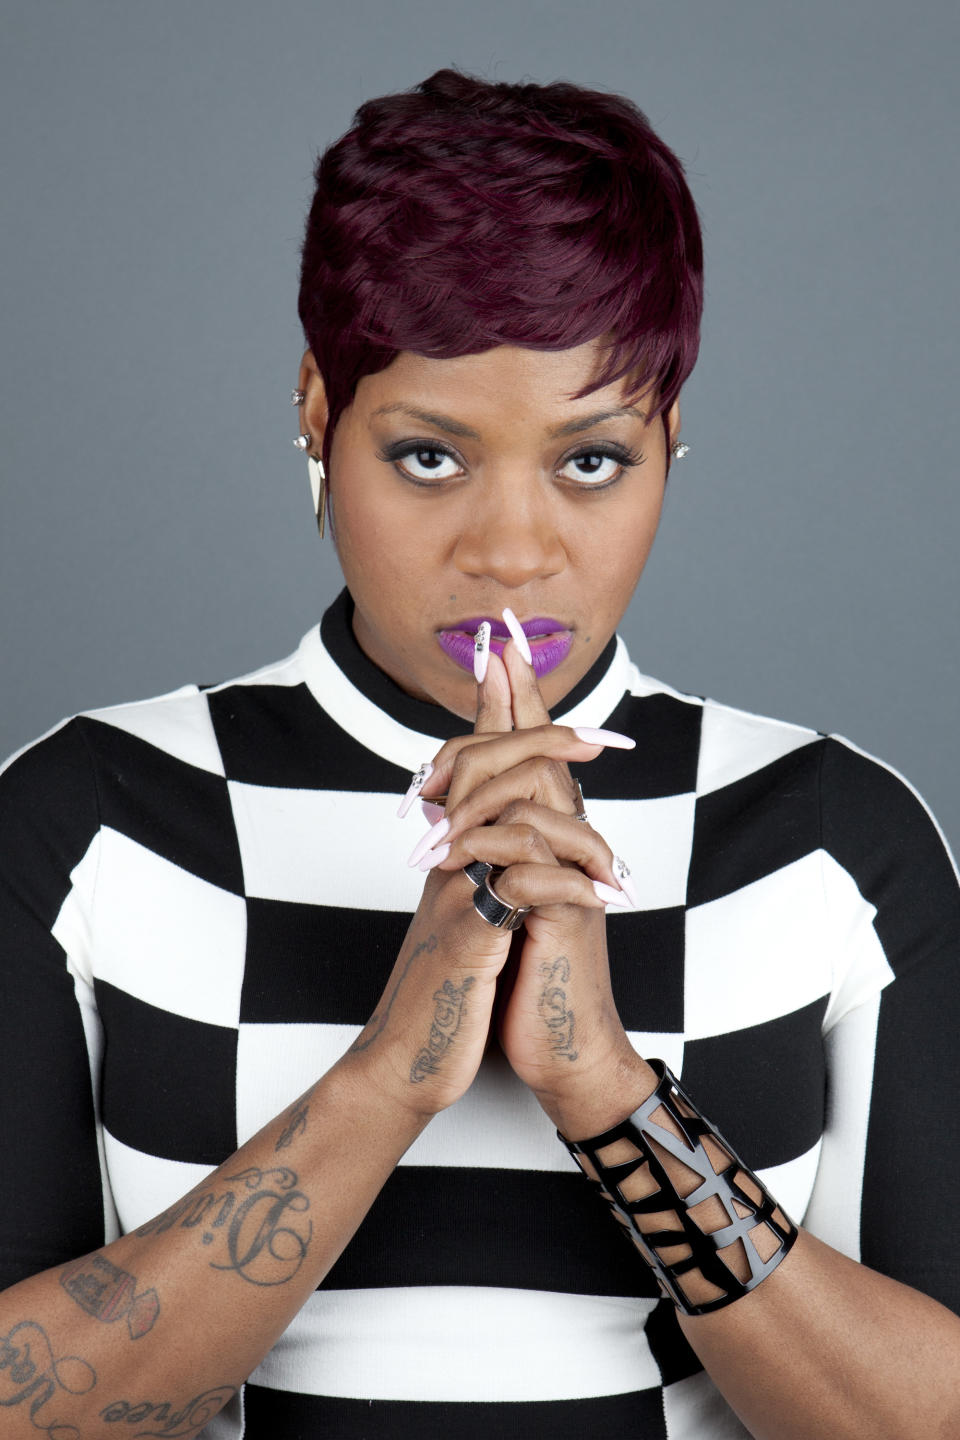 This April 24, 2013 photo shows American R&B singer Fantasia Barrino posing for a portrait to promote her new album "Side Effects of You," in New York. (Photo by Amy Sussman/Invision/AP)